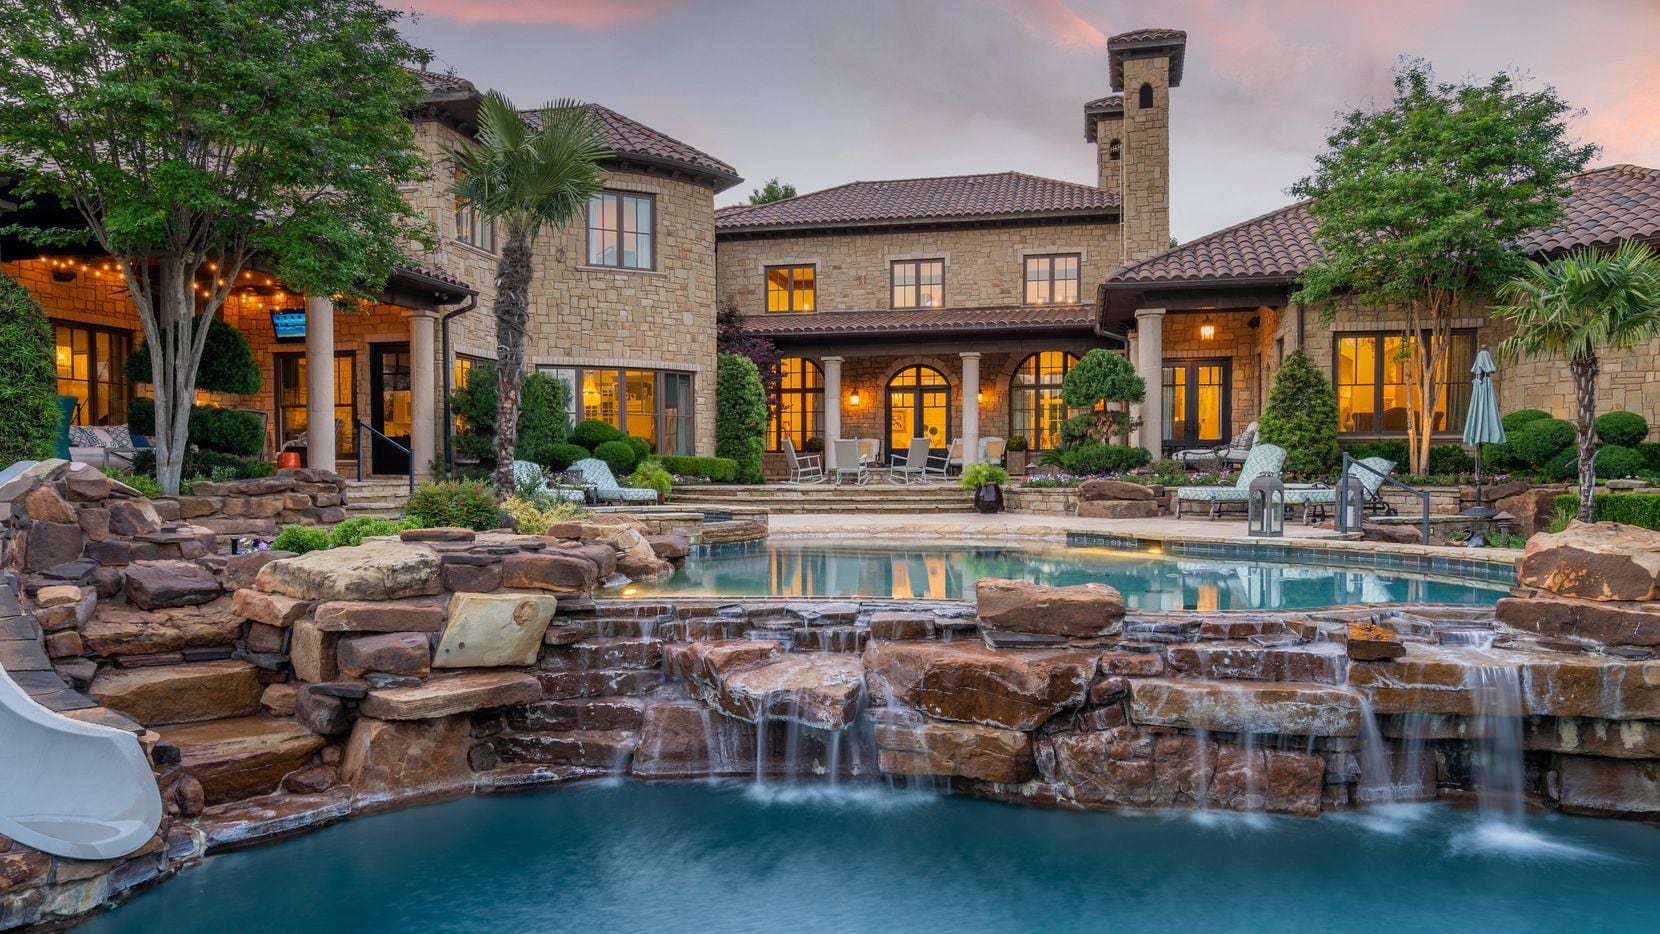 Former Dallas Cowboys star Jason Witten is selling his mansion in Westlake's Vaquero neighborhood for $4.7 million.